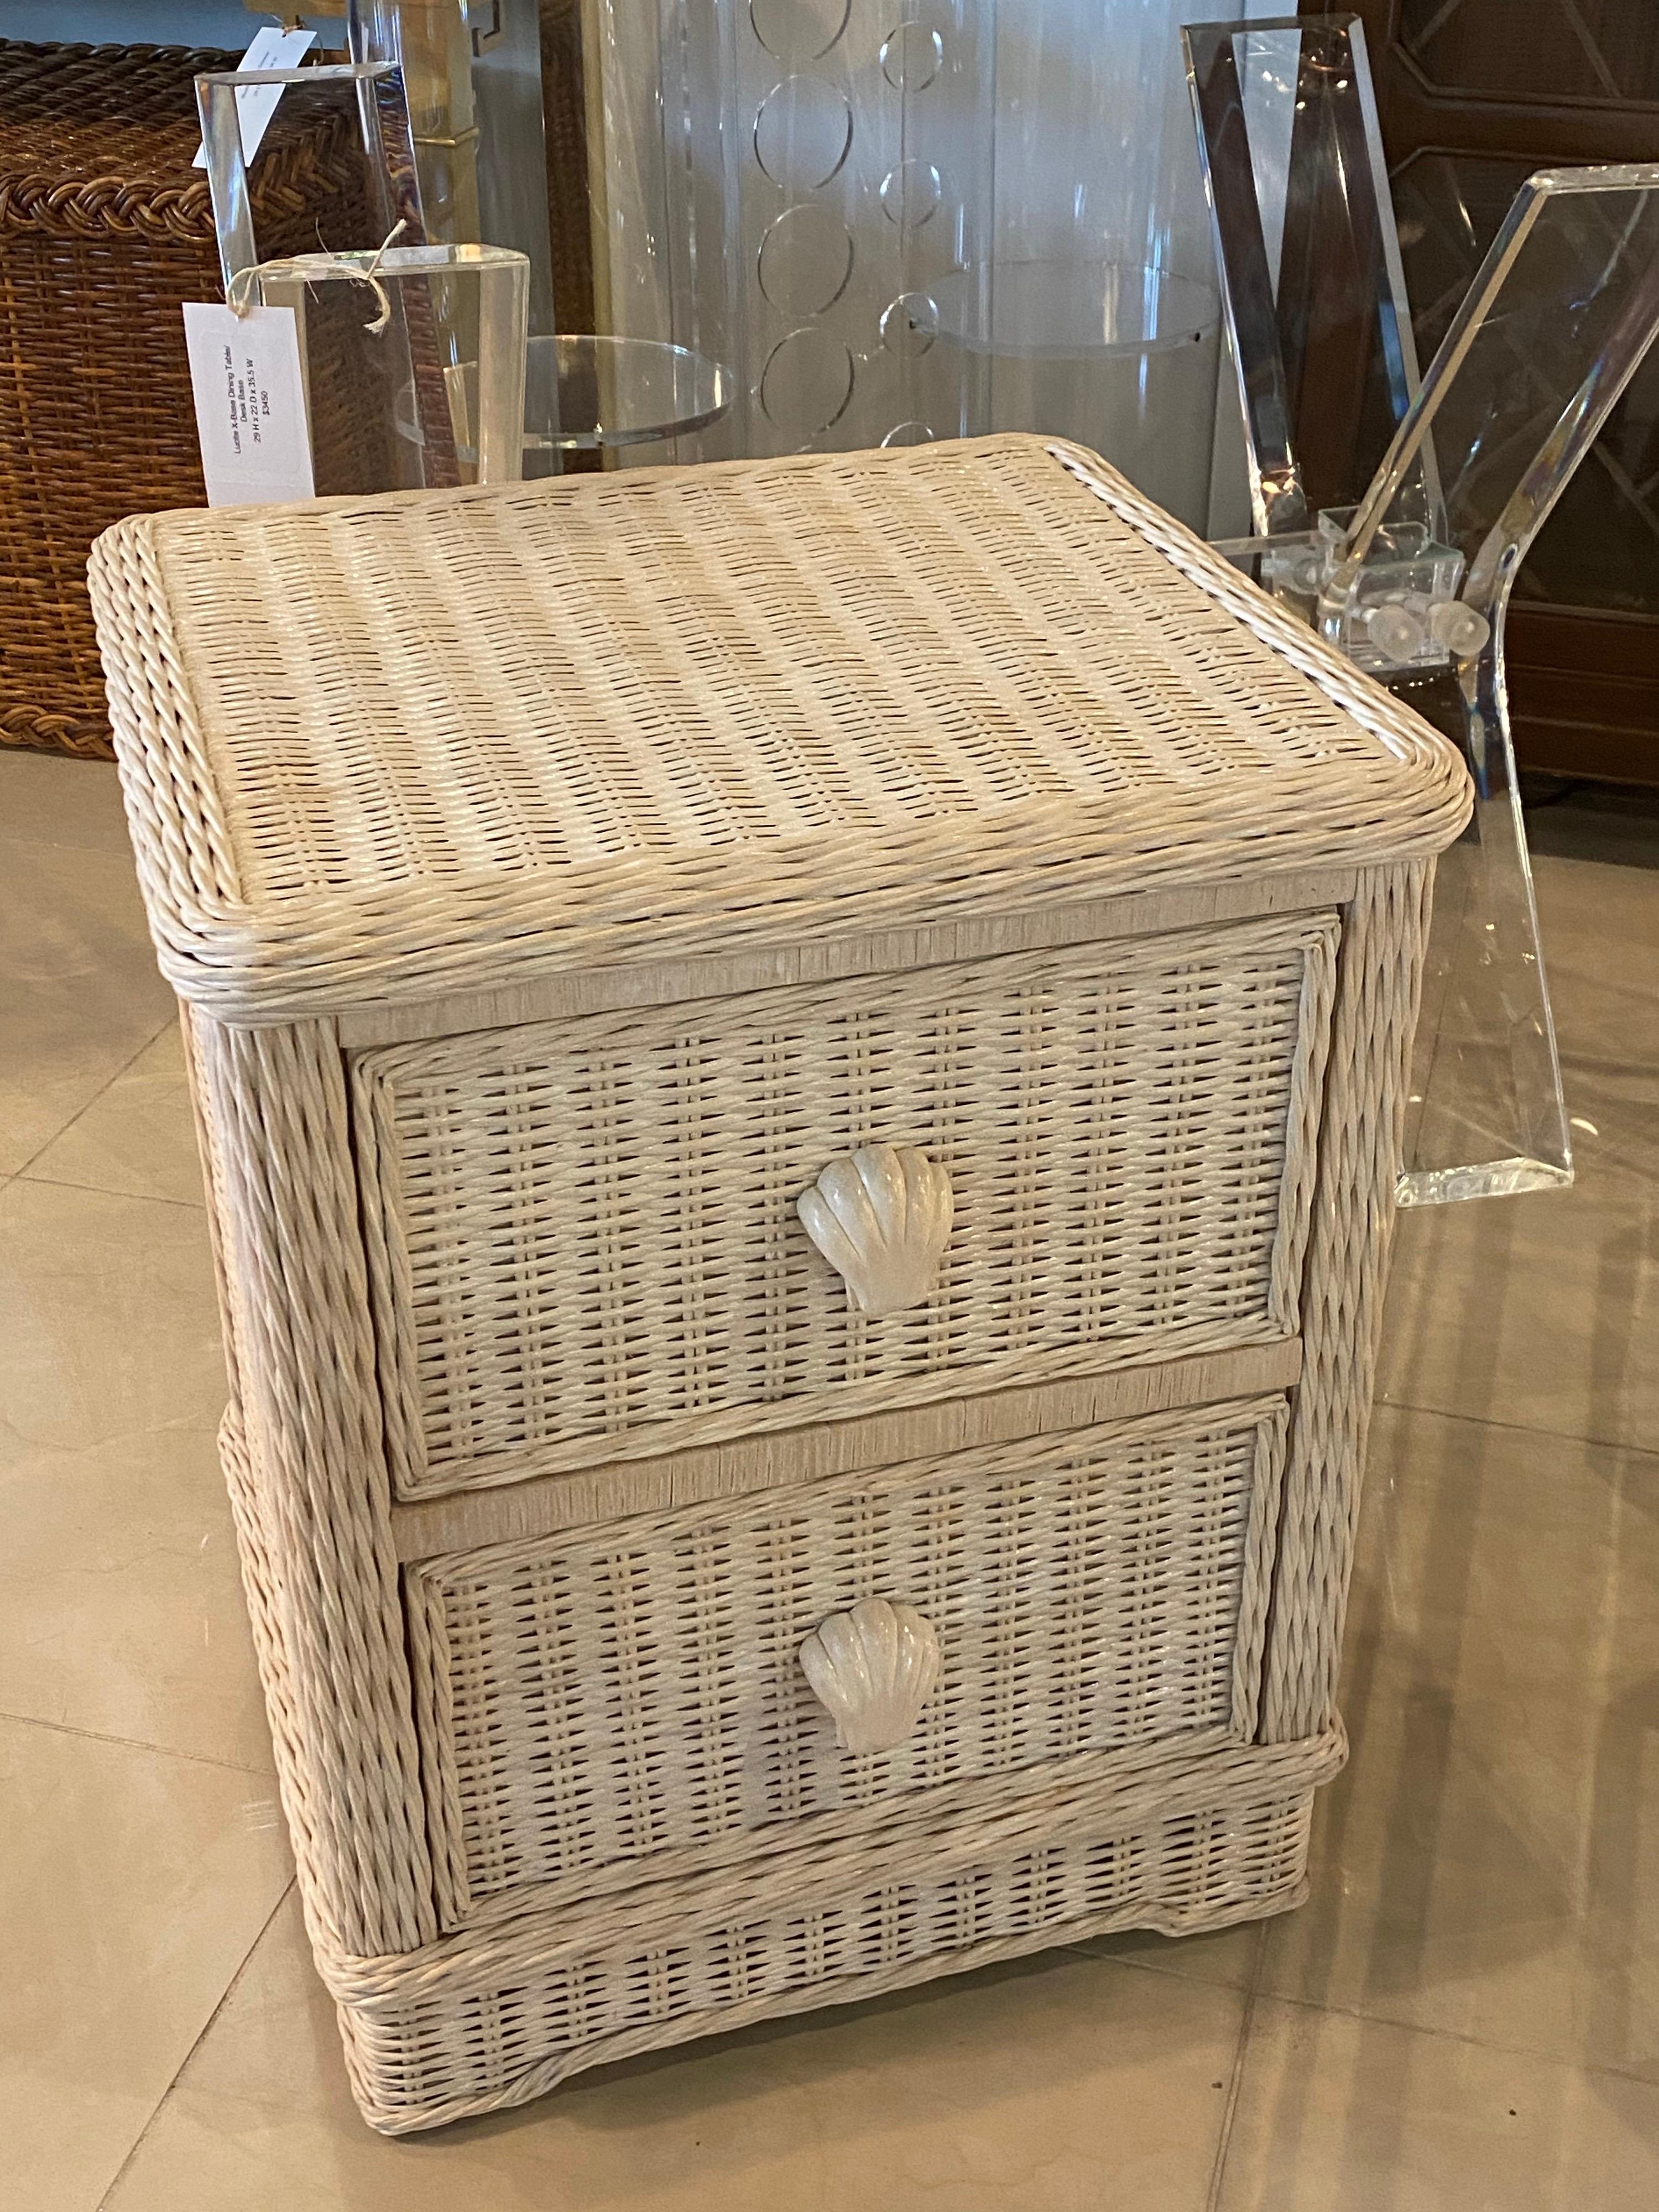 Lovely vintage wicker nightstand with 2 drawers. Original washed cream color. Carved wood shell seashell drawer pulls. No damage to wicker.